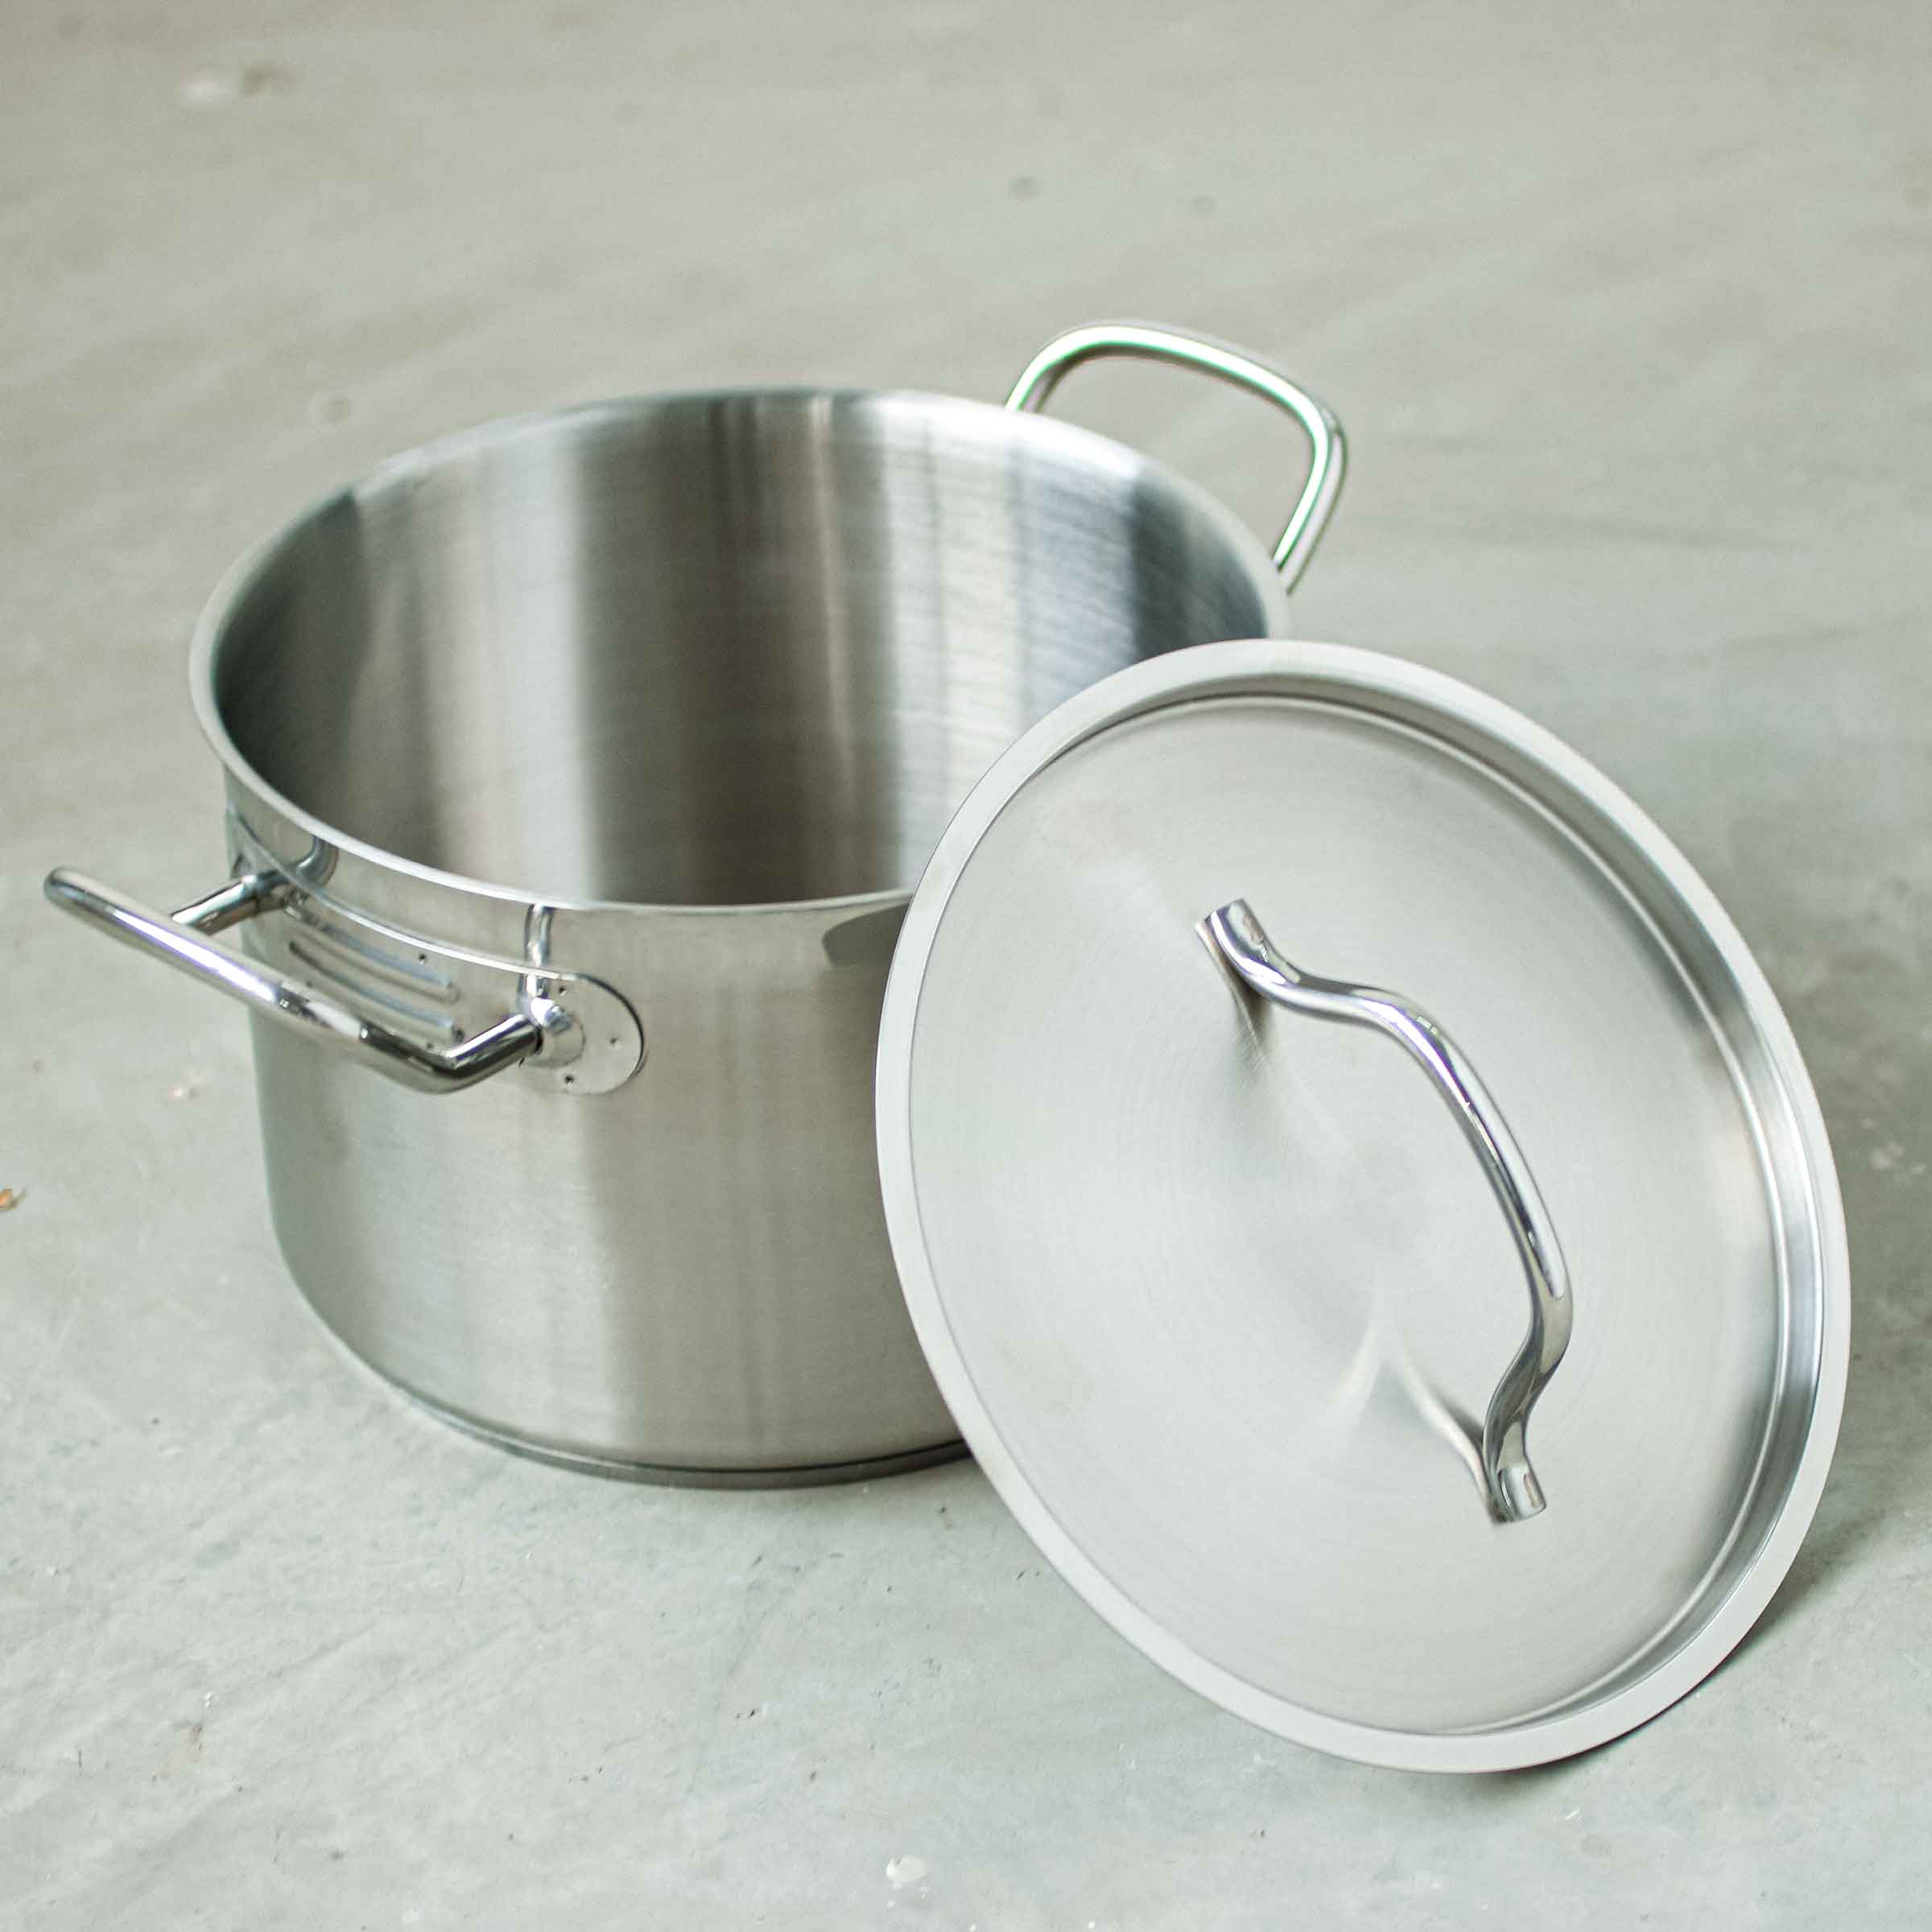 8-Quart Pot Stainless Steel with Lid